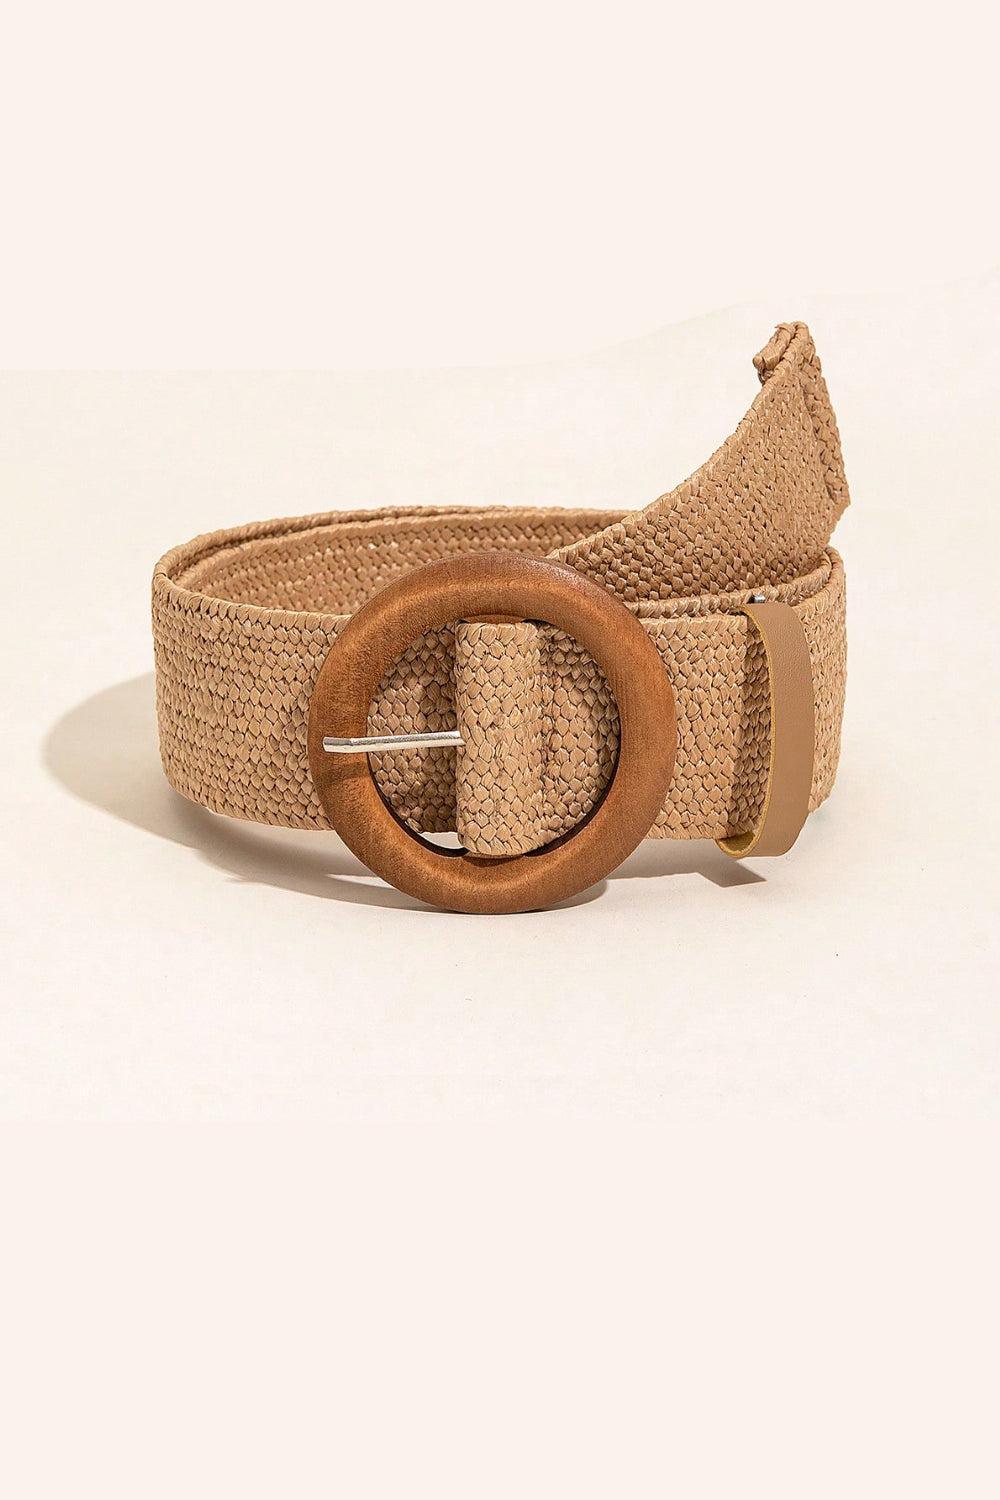 a belt with a wooden buckle on a white background